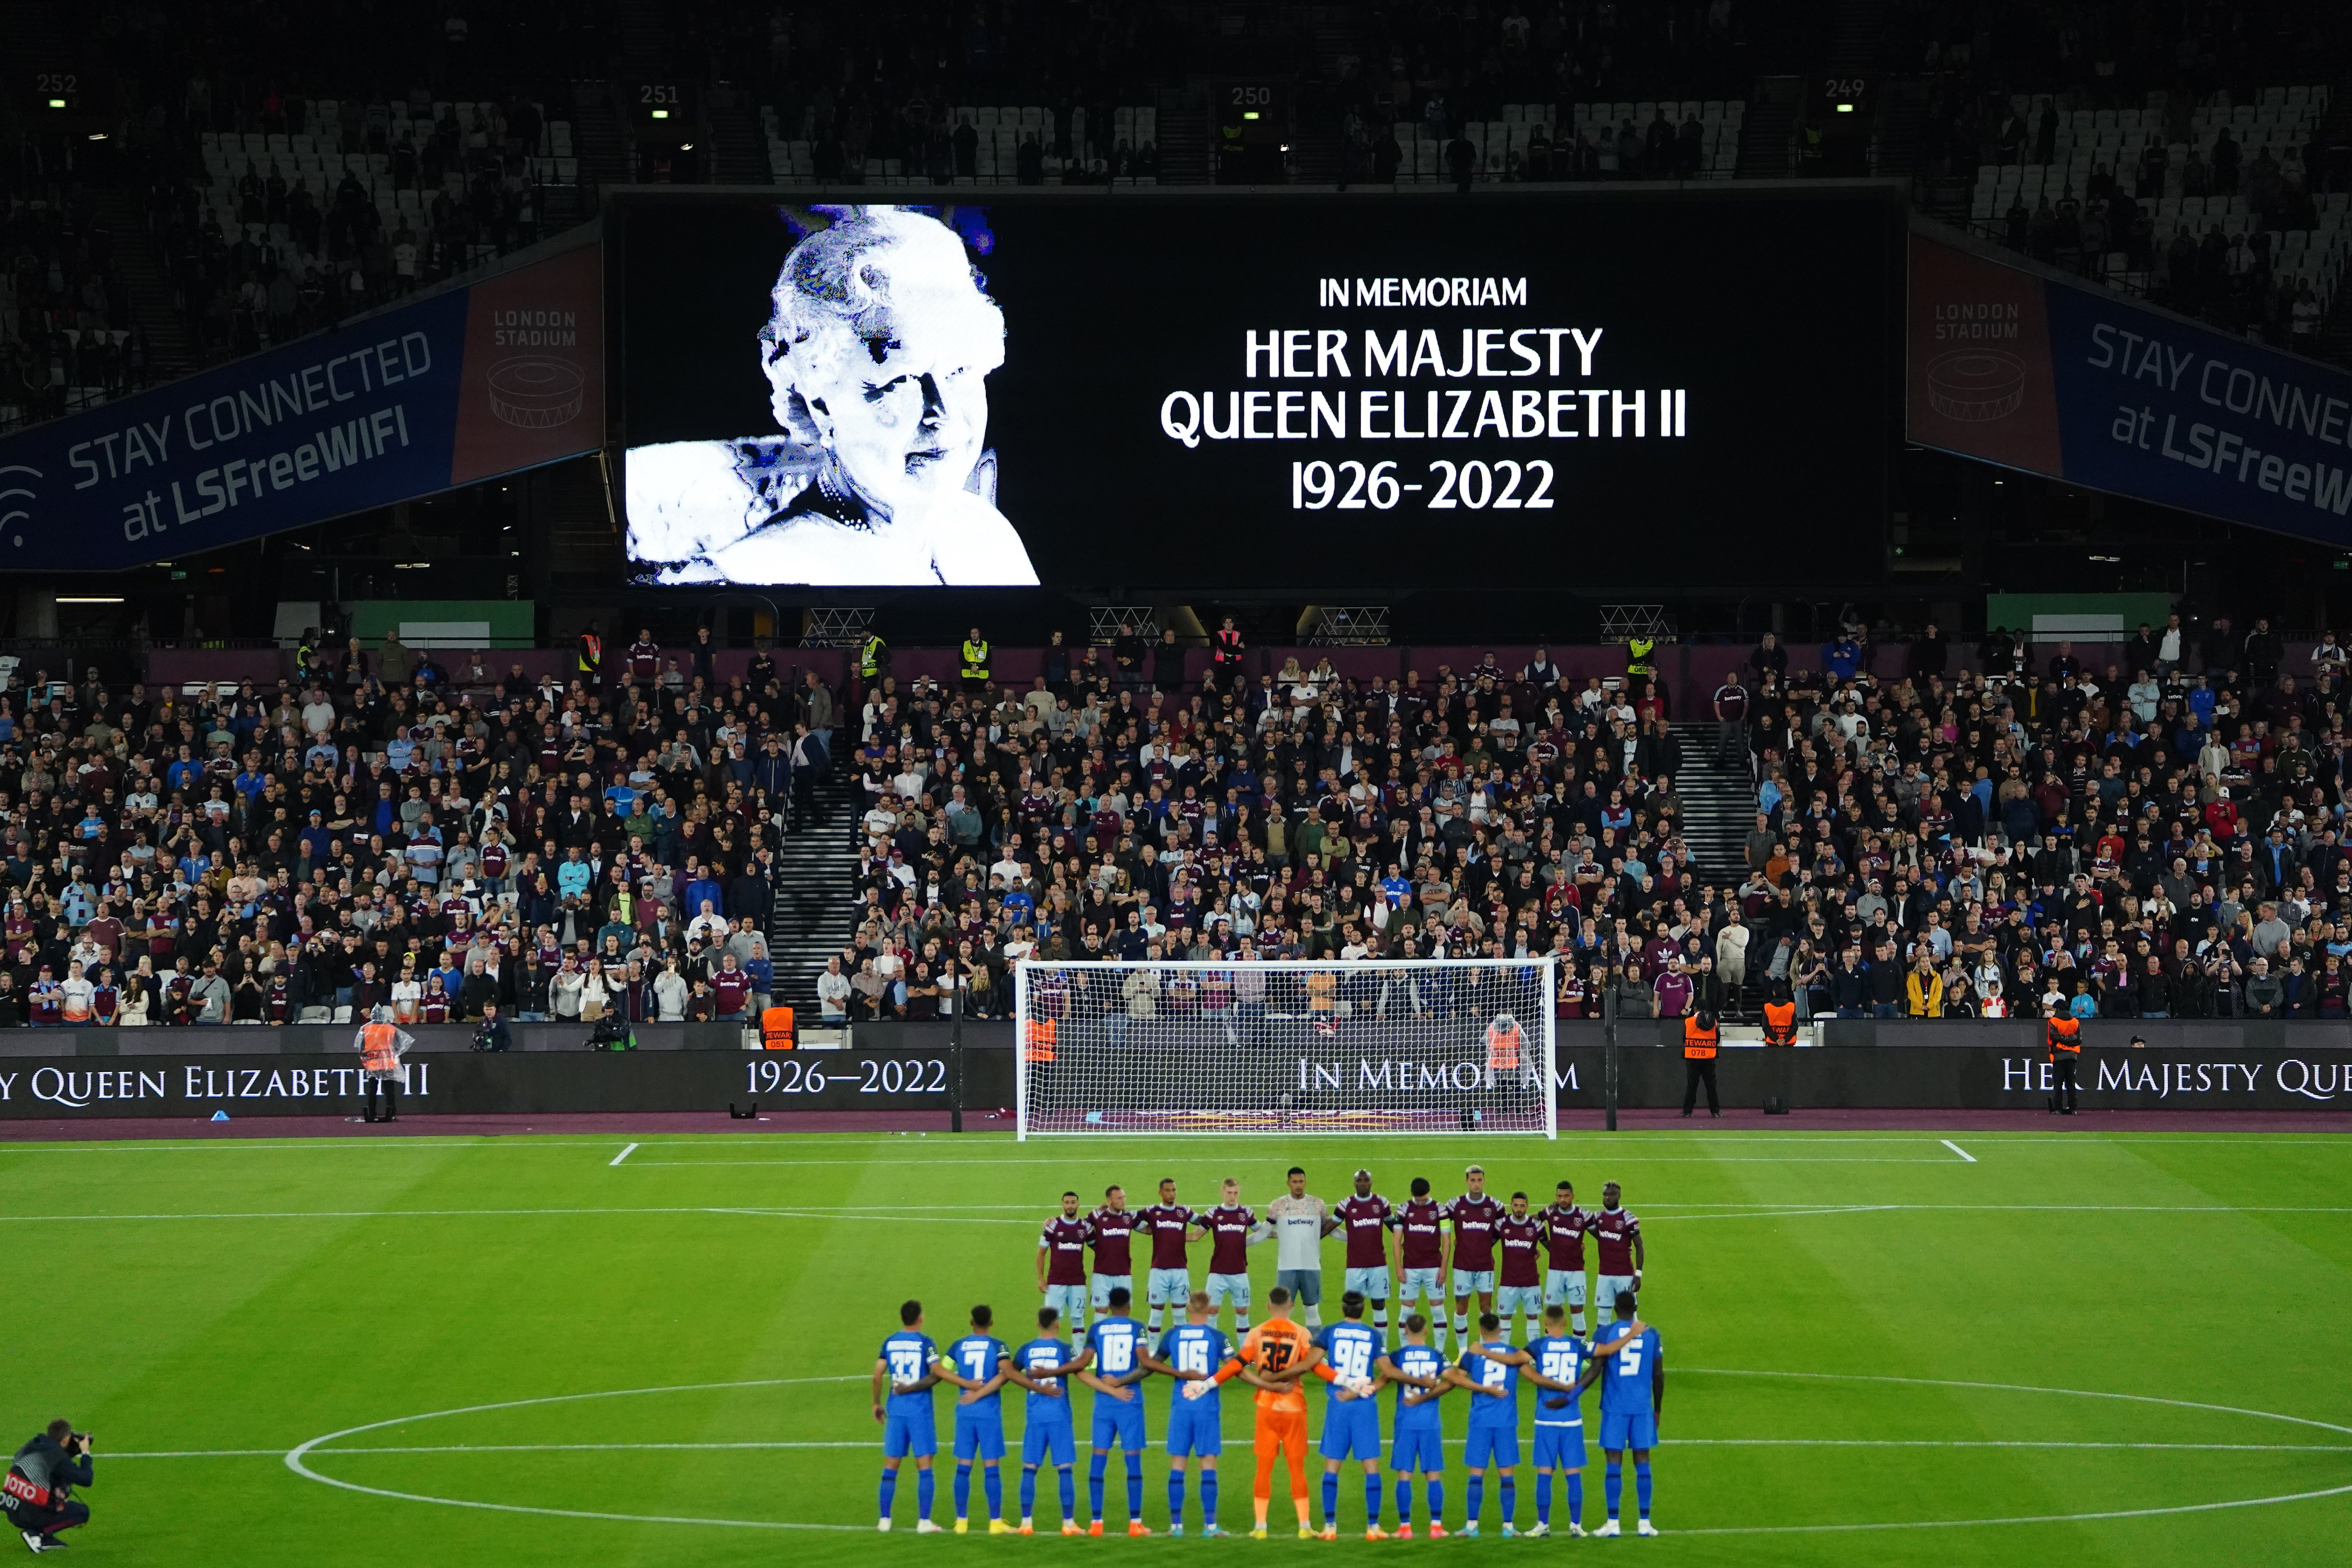 Fans at the London Stadium on Thursday for the European tie between West Ham and FCSB were able to pay tribute